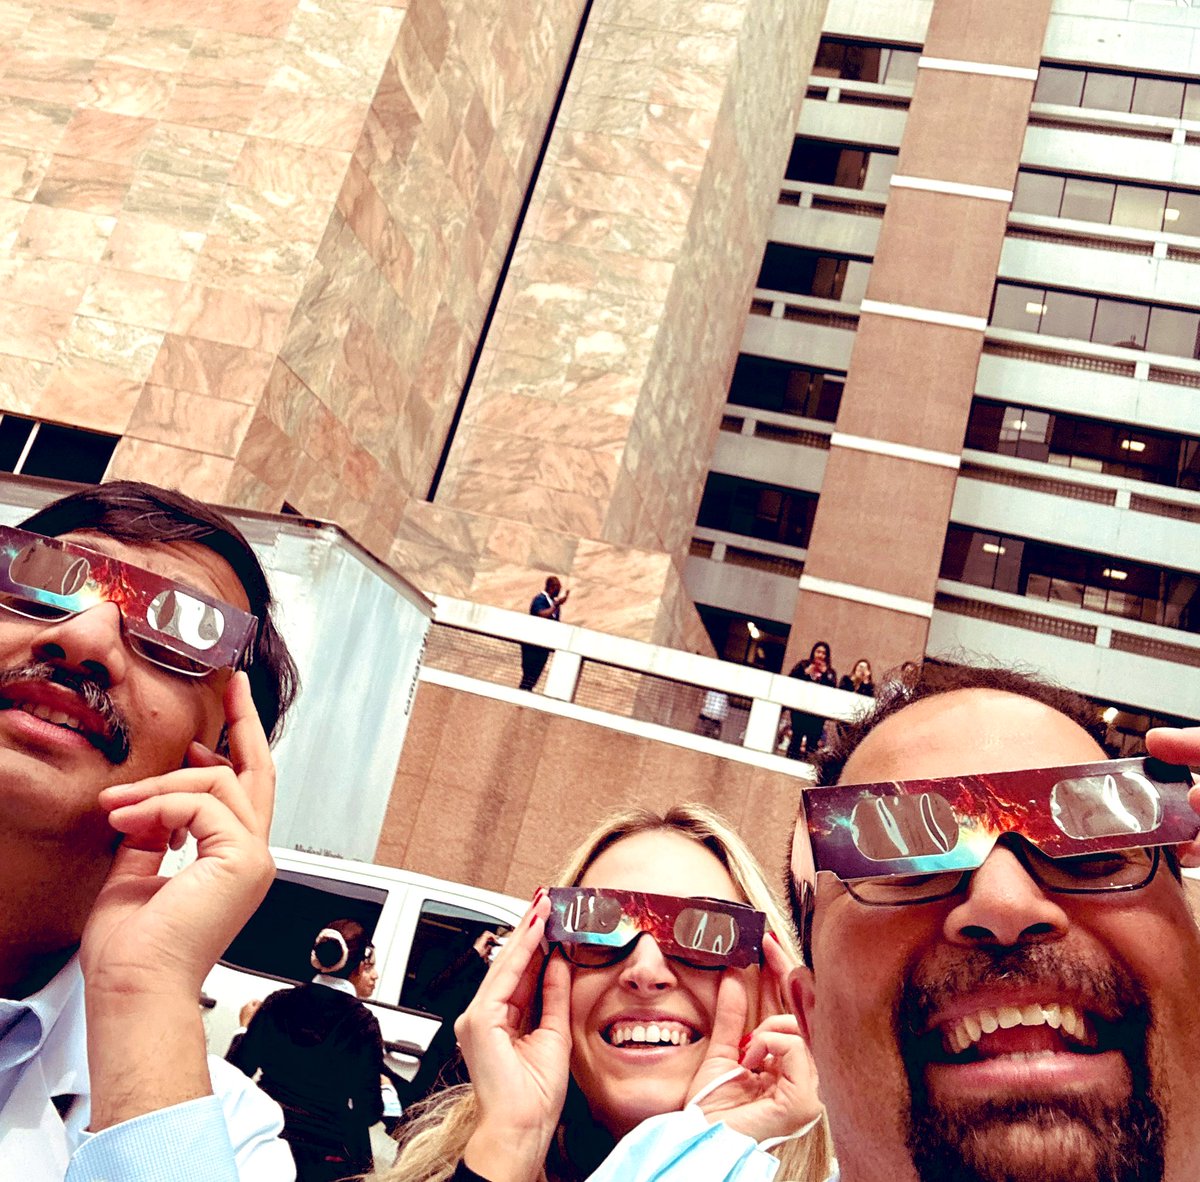 👉👉👉Wow! A spectacular, reflective moment ▶️bringing us all together #TotalSolarEclipse2024 in #Texas with Prof @NitinJainMD & Prof Pemmaraju teams!🌙 🌖 b/c at the end of the day #WeAreAllInThisTogether | @Aiims1742 @VincentRK @sanamloghavi @tmprowell @acweyand @marklewismd